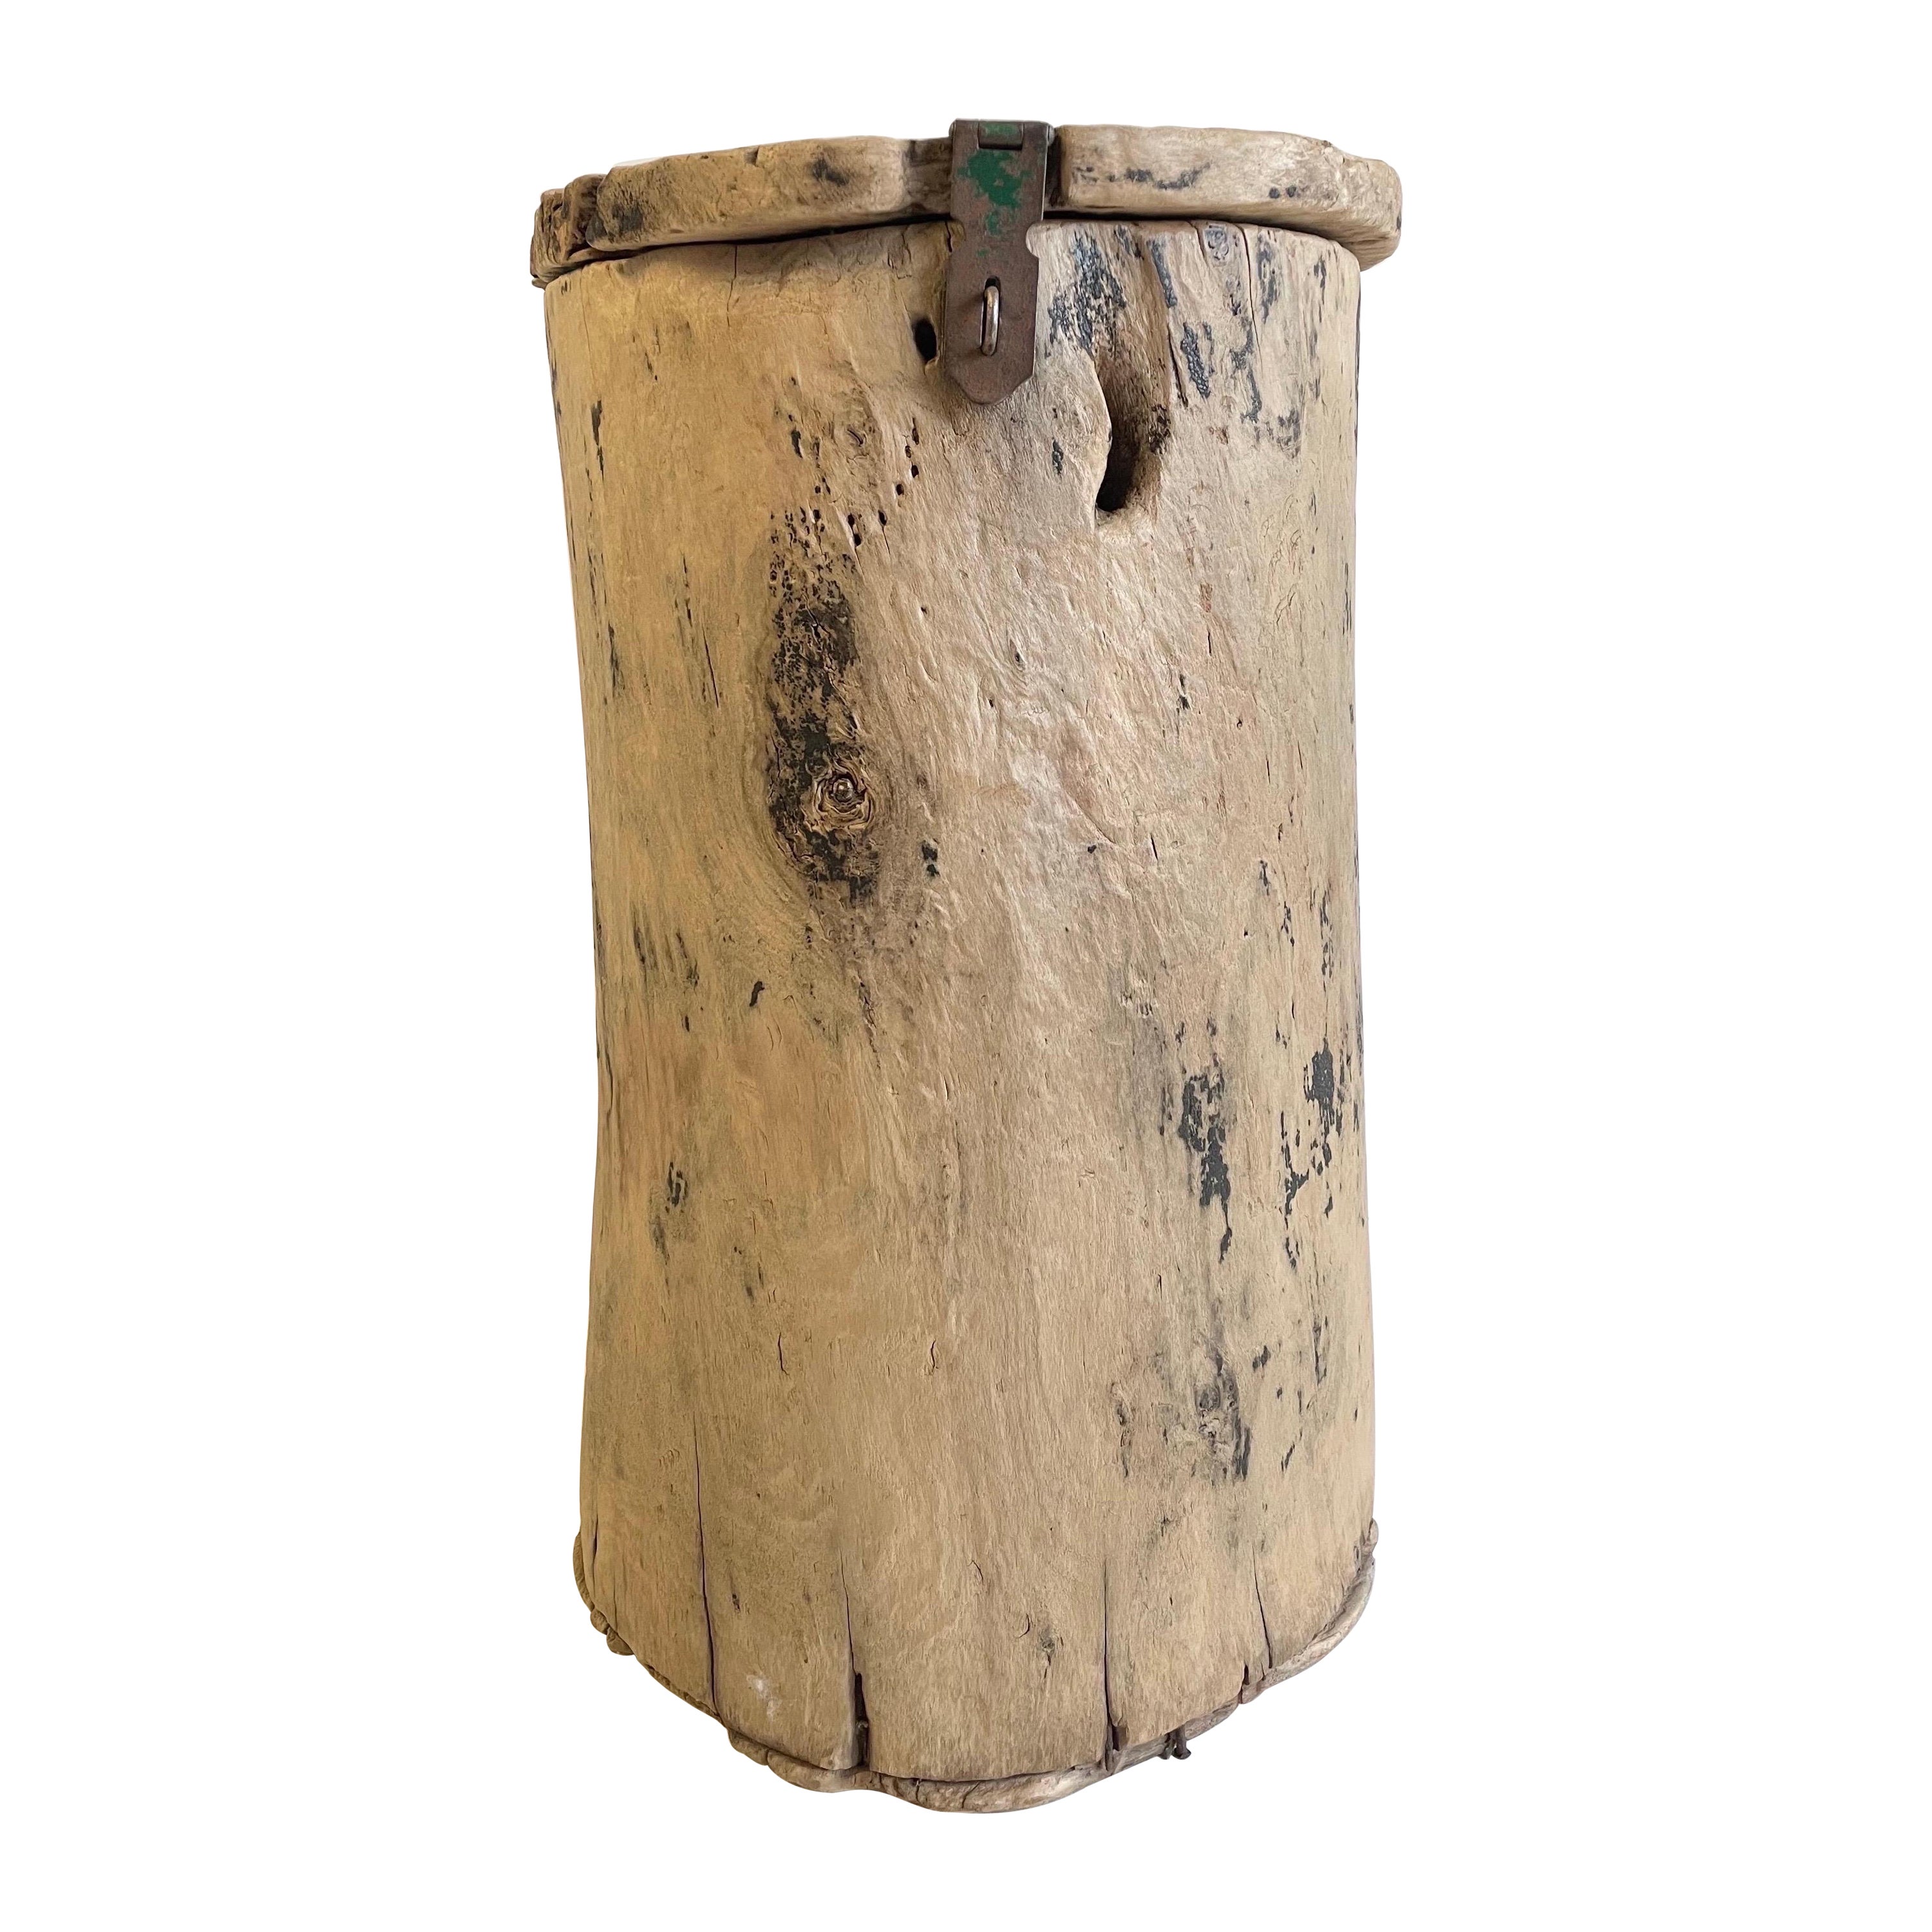 Cypress Wood Side Table Carved From a Stump Bucket with Lid